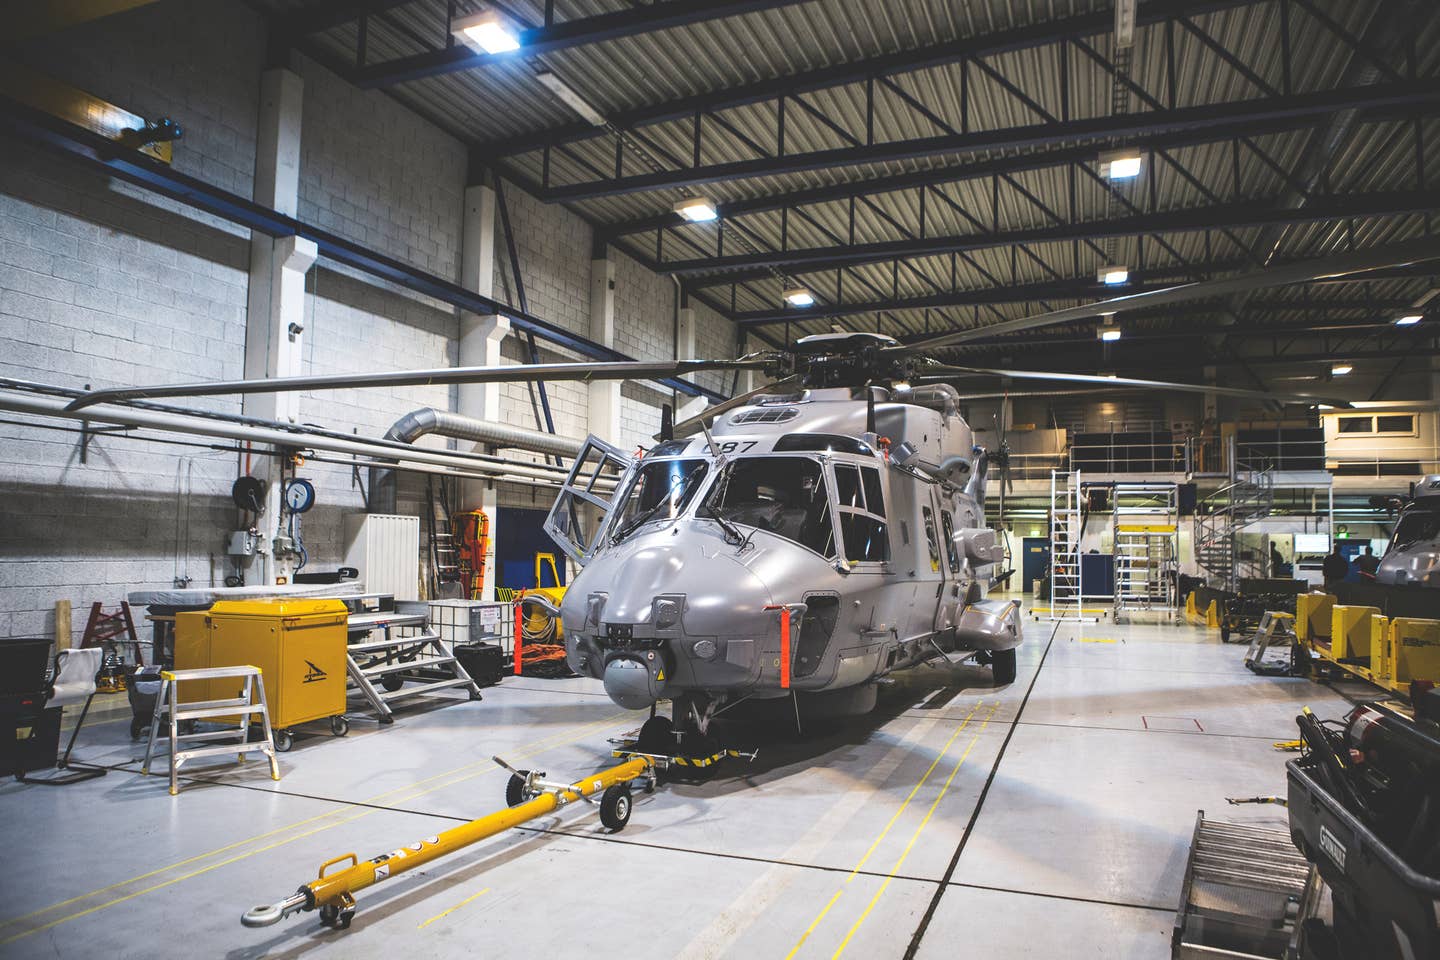 A Norwegian NH90 helicopter in the hangar. Norwegian Ministry of Defense